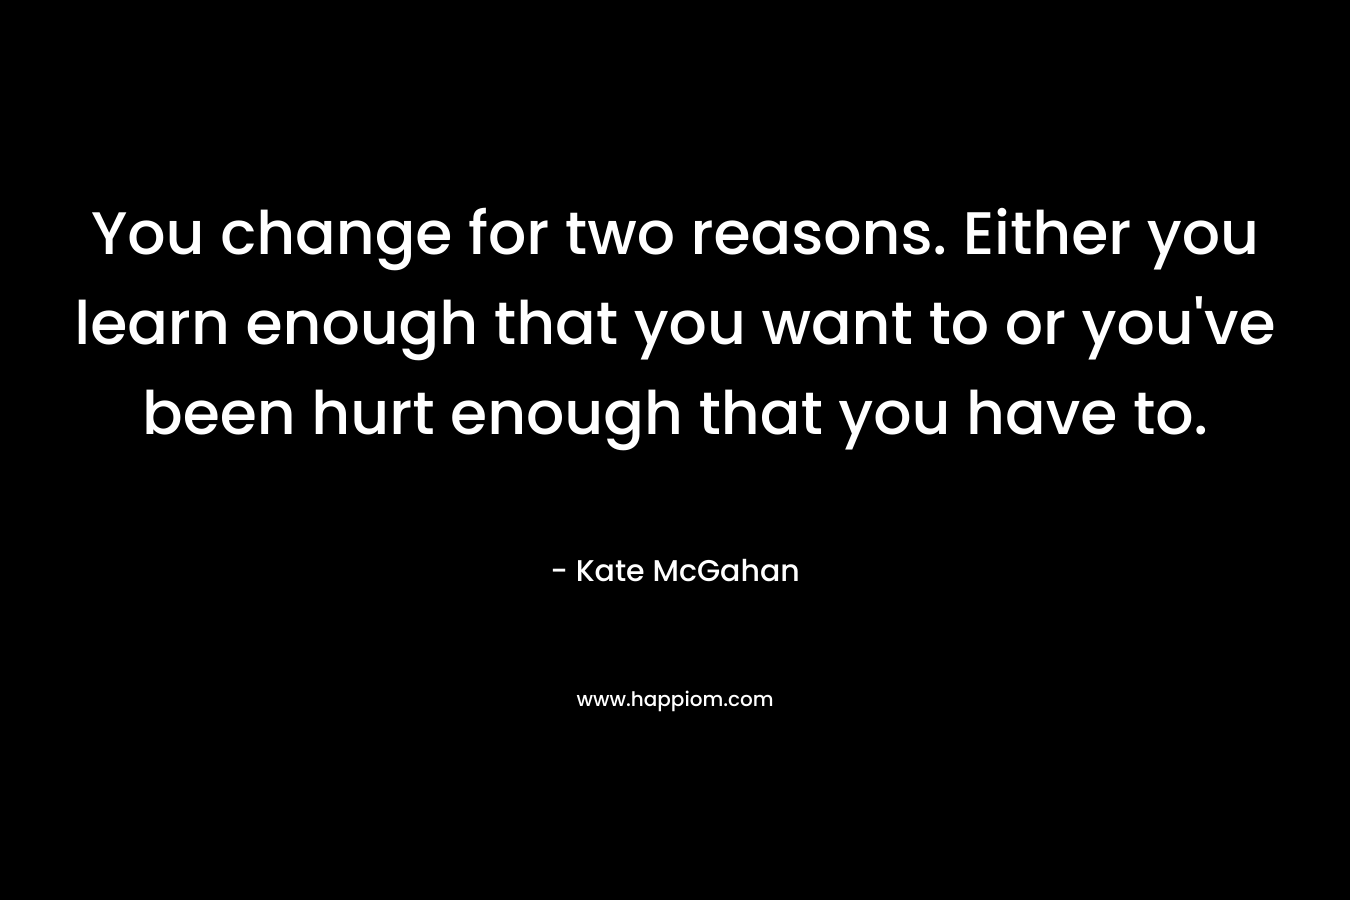 You change for two reasons. Either you learn enough that you want to or you've been hurt enough that you have to.